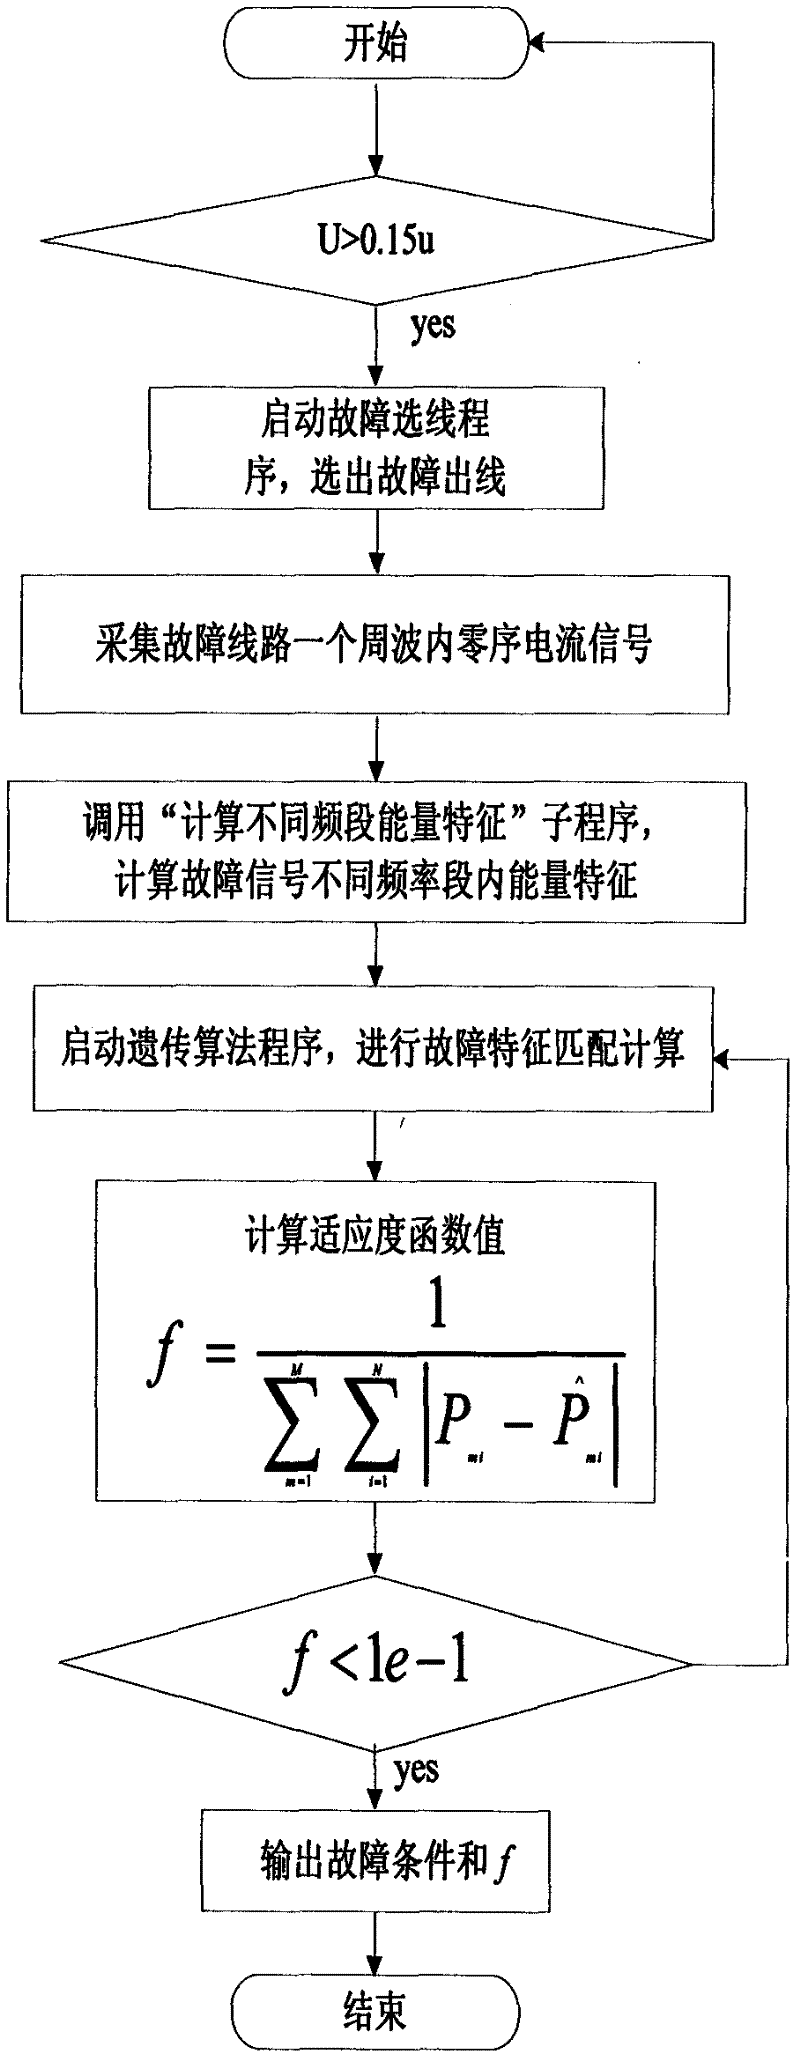 Method for measuring single phase ground fault distance of distribution network based on Hilbert-huang transform and genetic algorithm